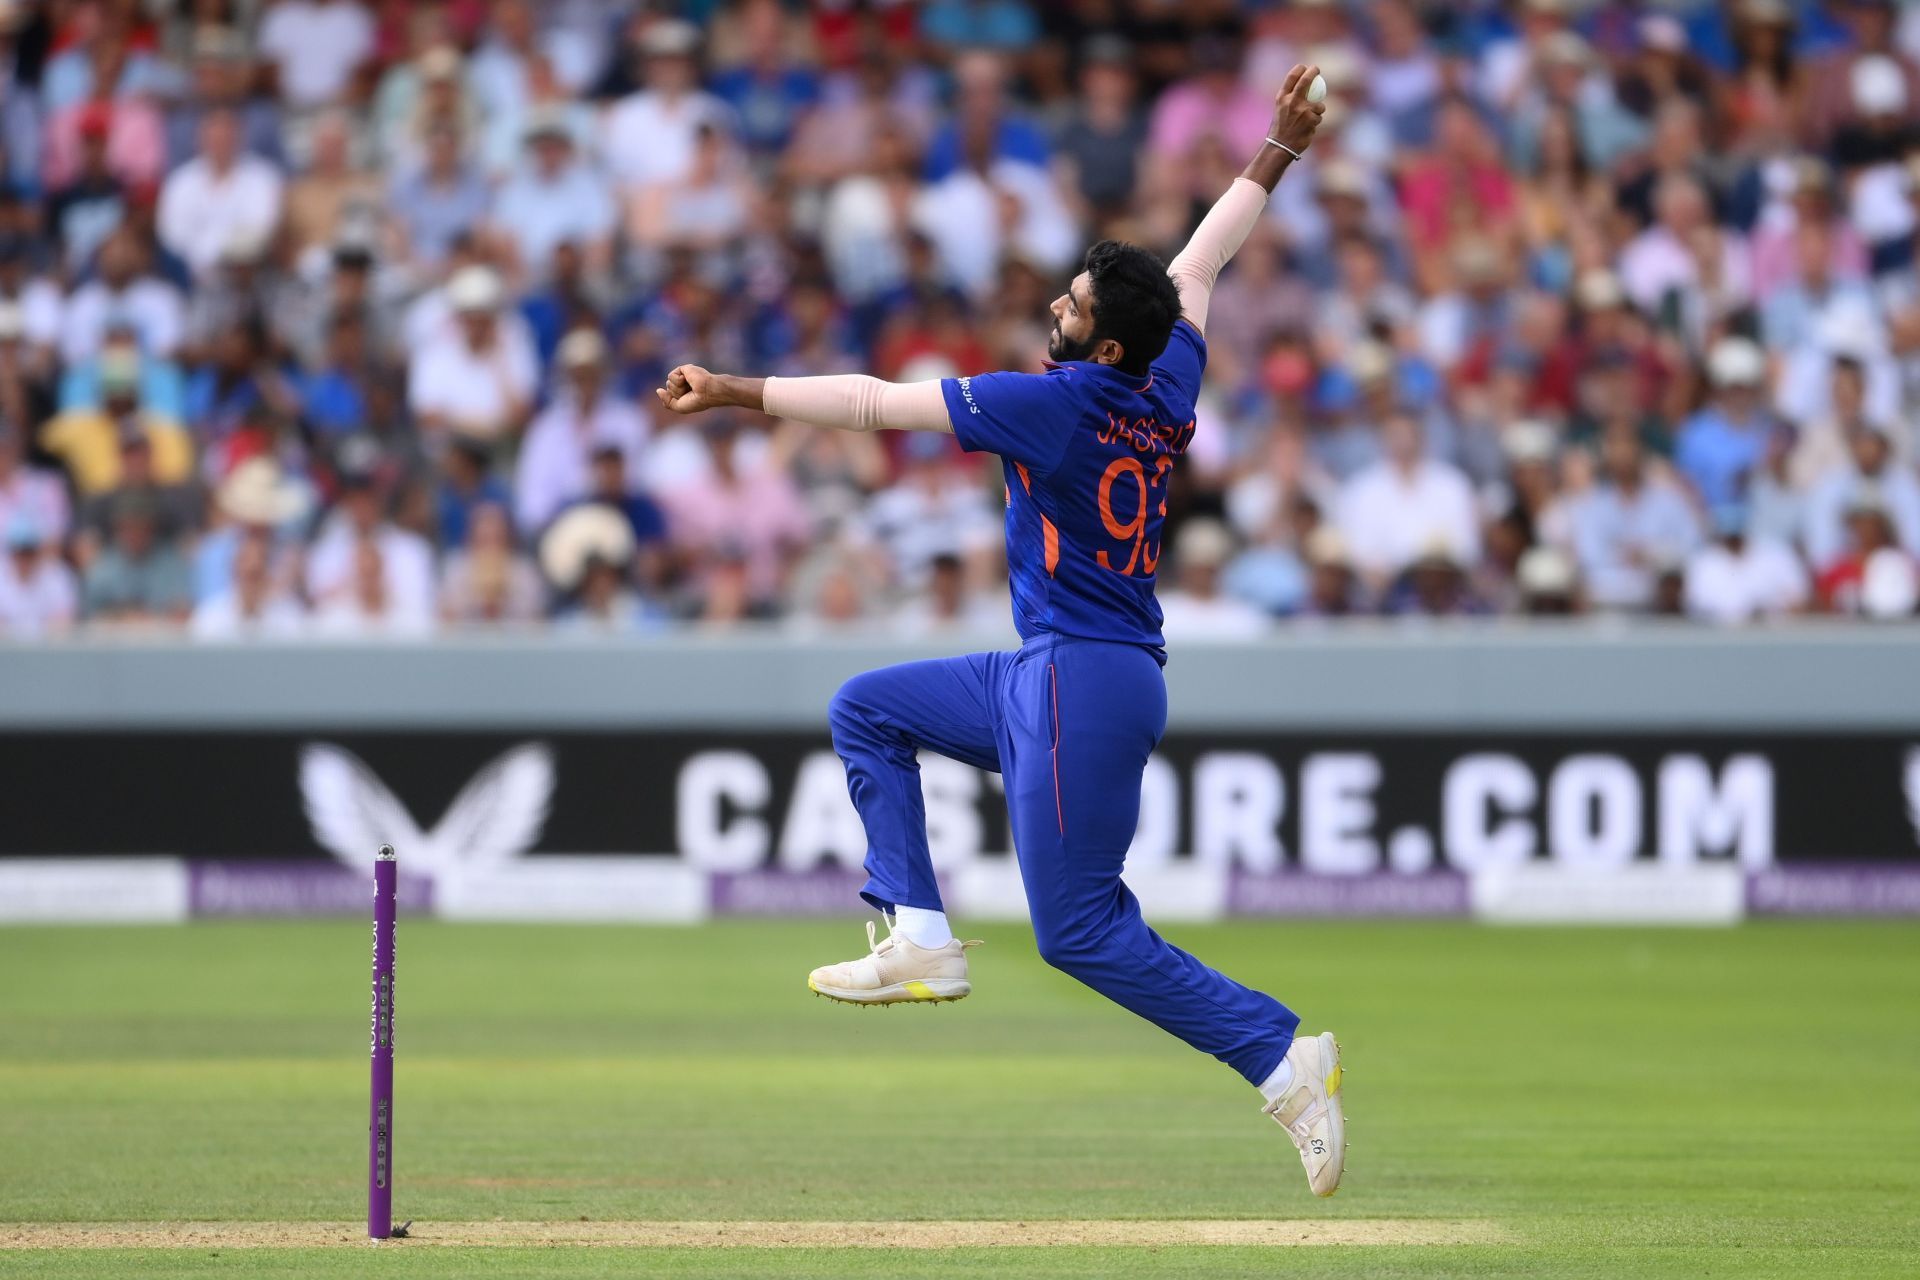 Bumrah is yet to be cleared by the NCA